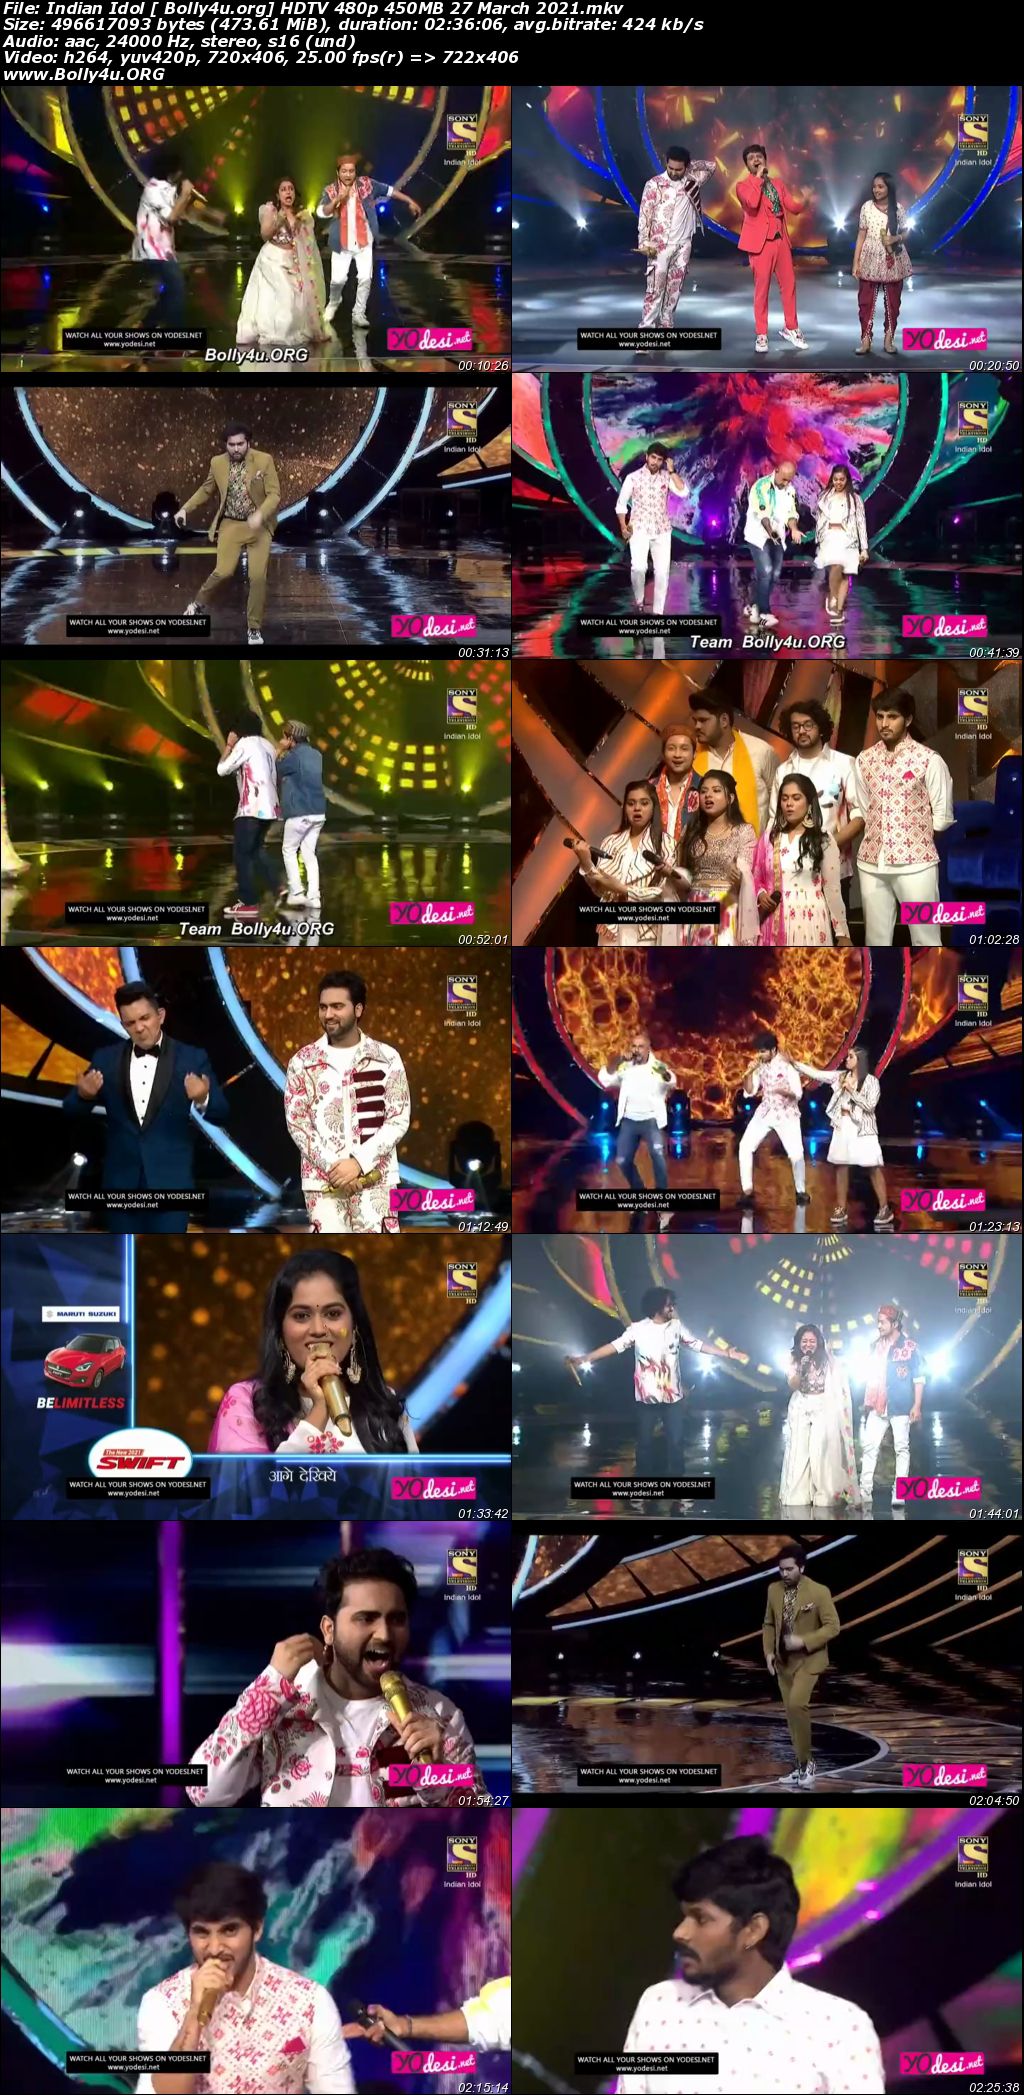 Indian Idol HDTV 480p 450MB 27 March 2021 Download